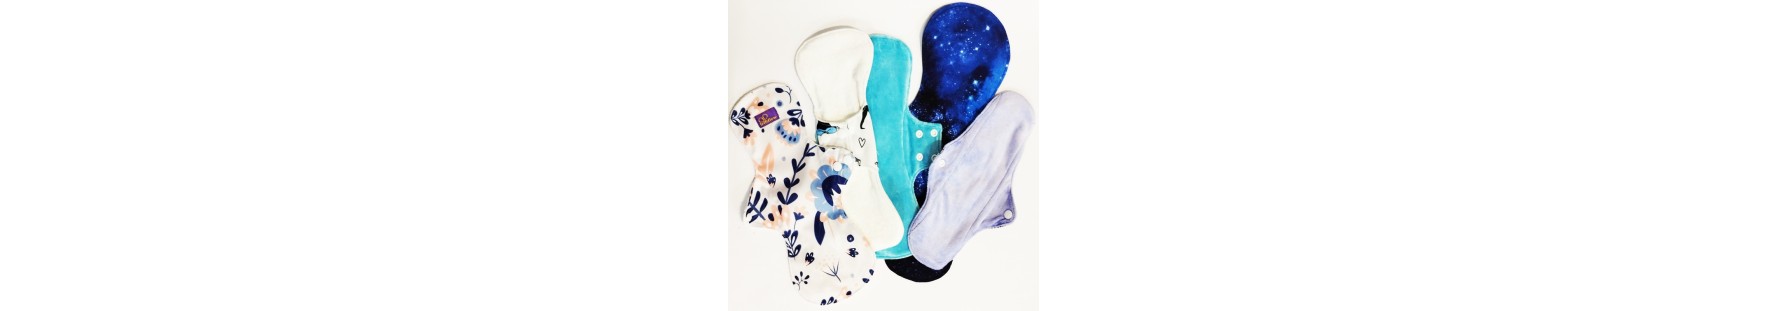 Reusable cloth pads for heavy flow or post partum